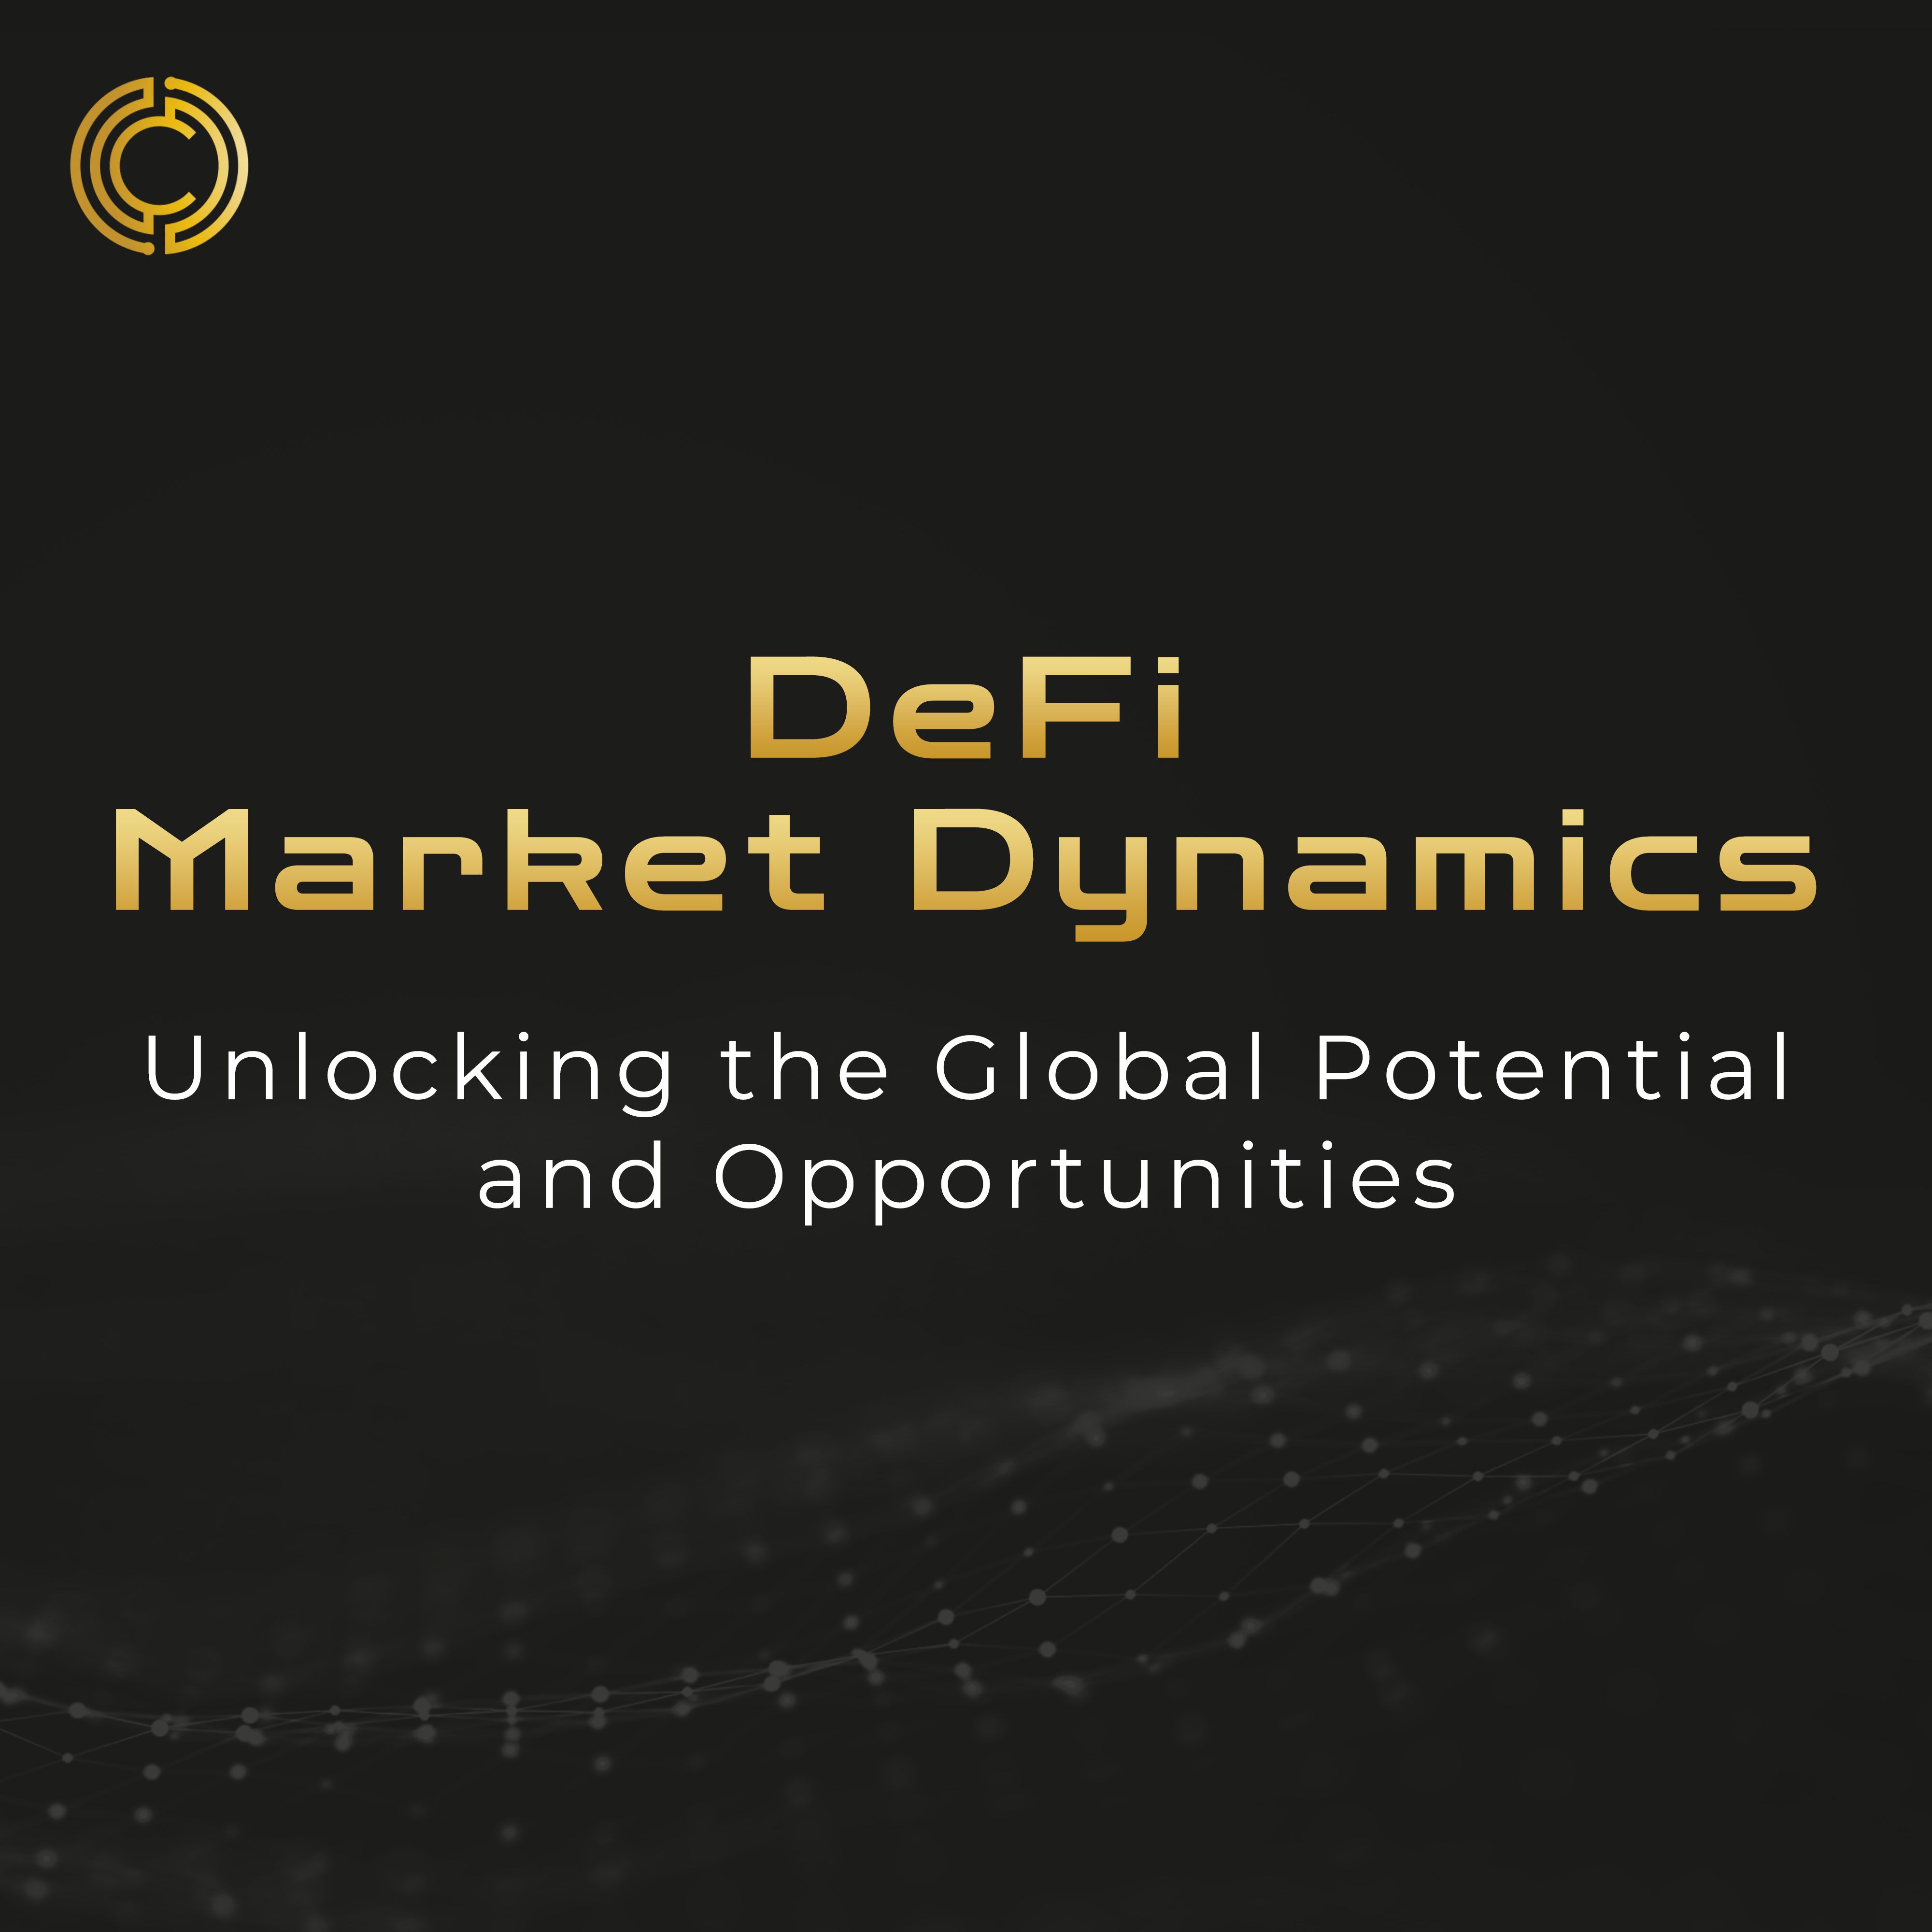 DeFi Market Dynamics: Unlocking the Global Potential and Opportunities